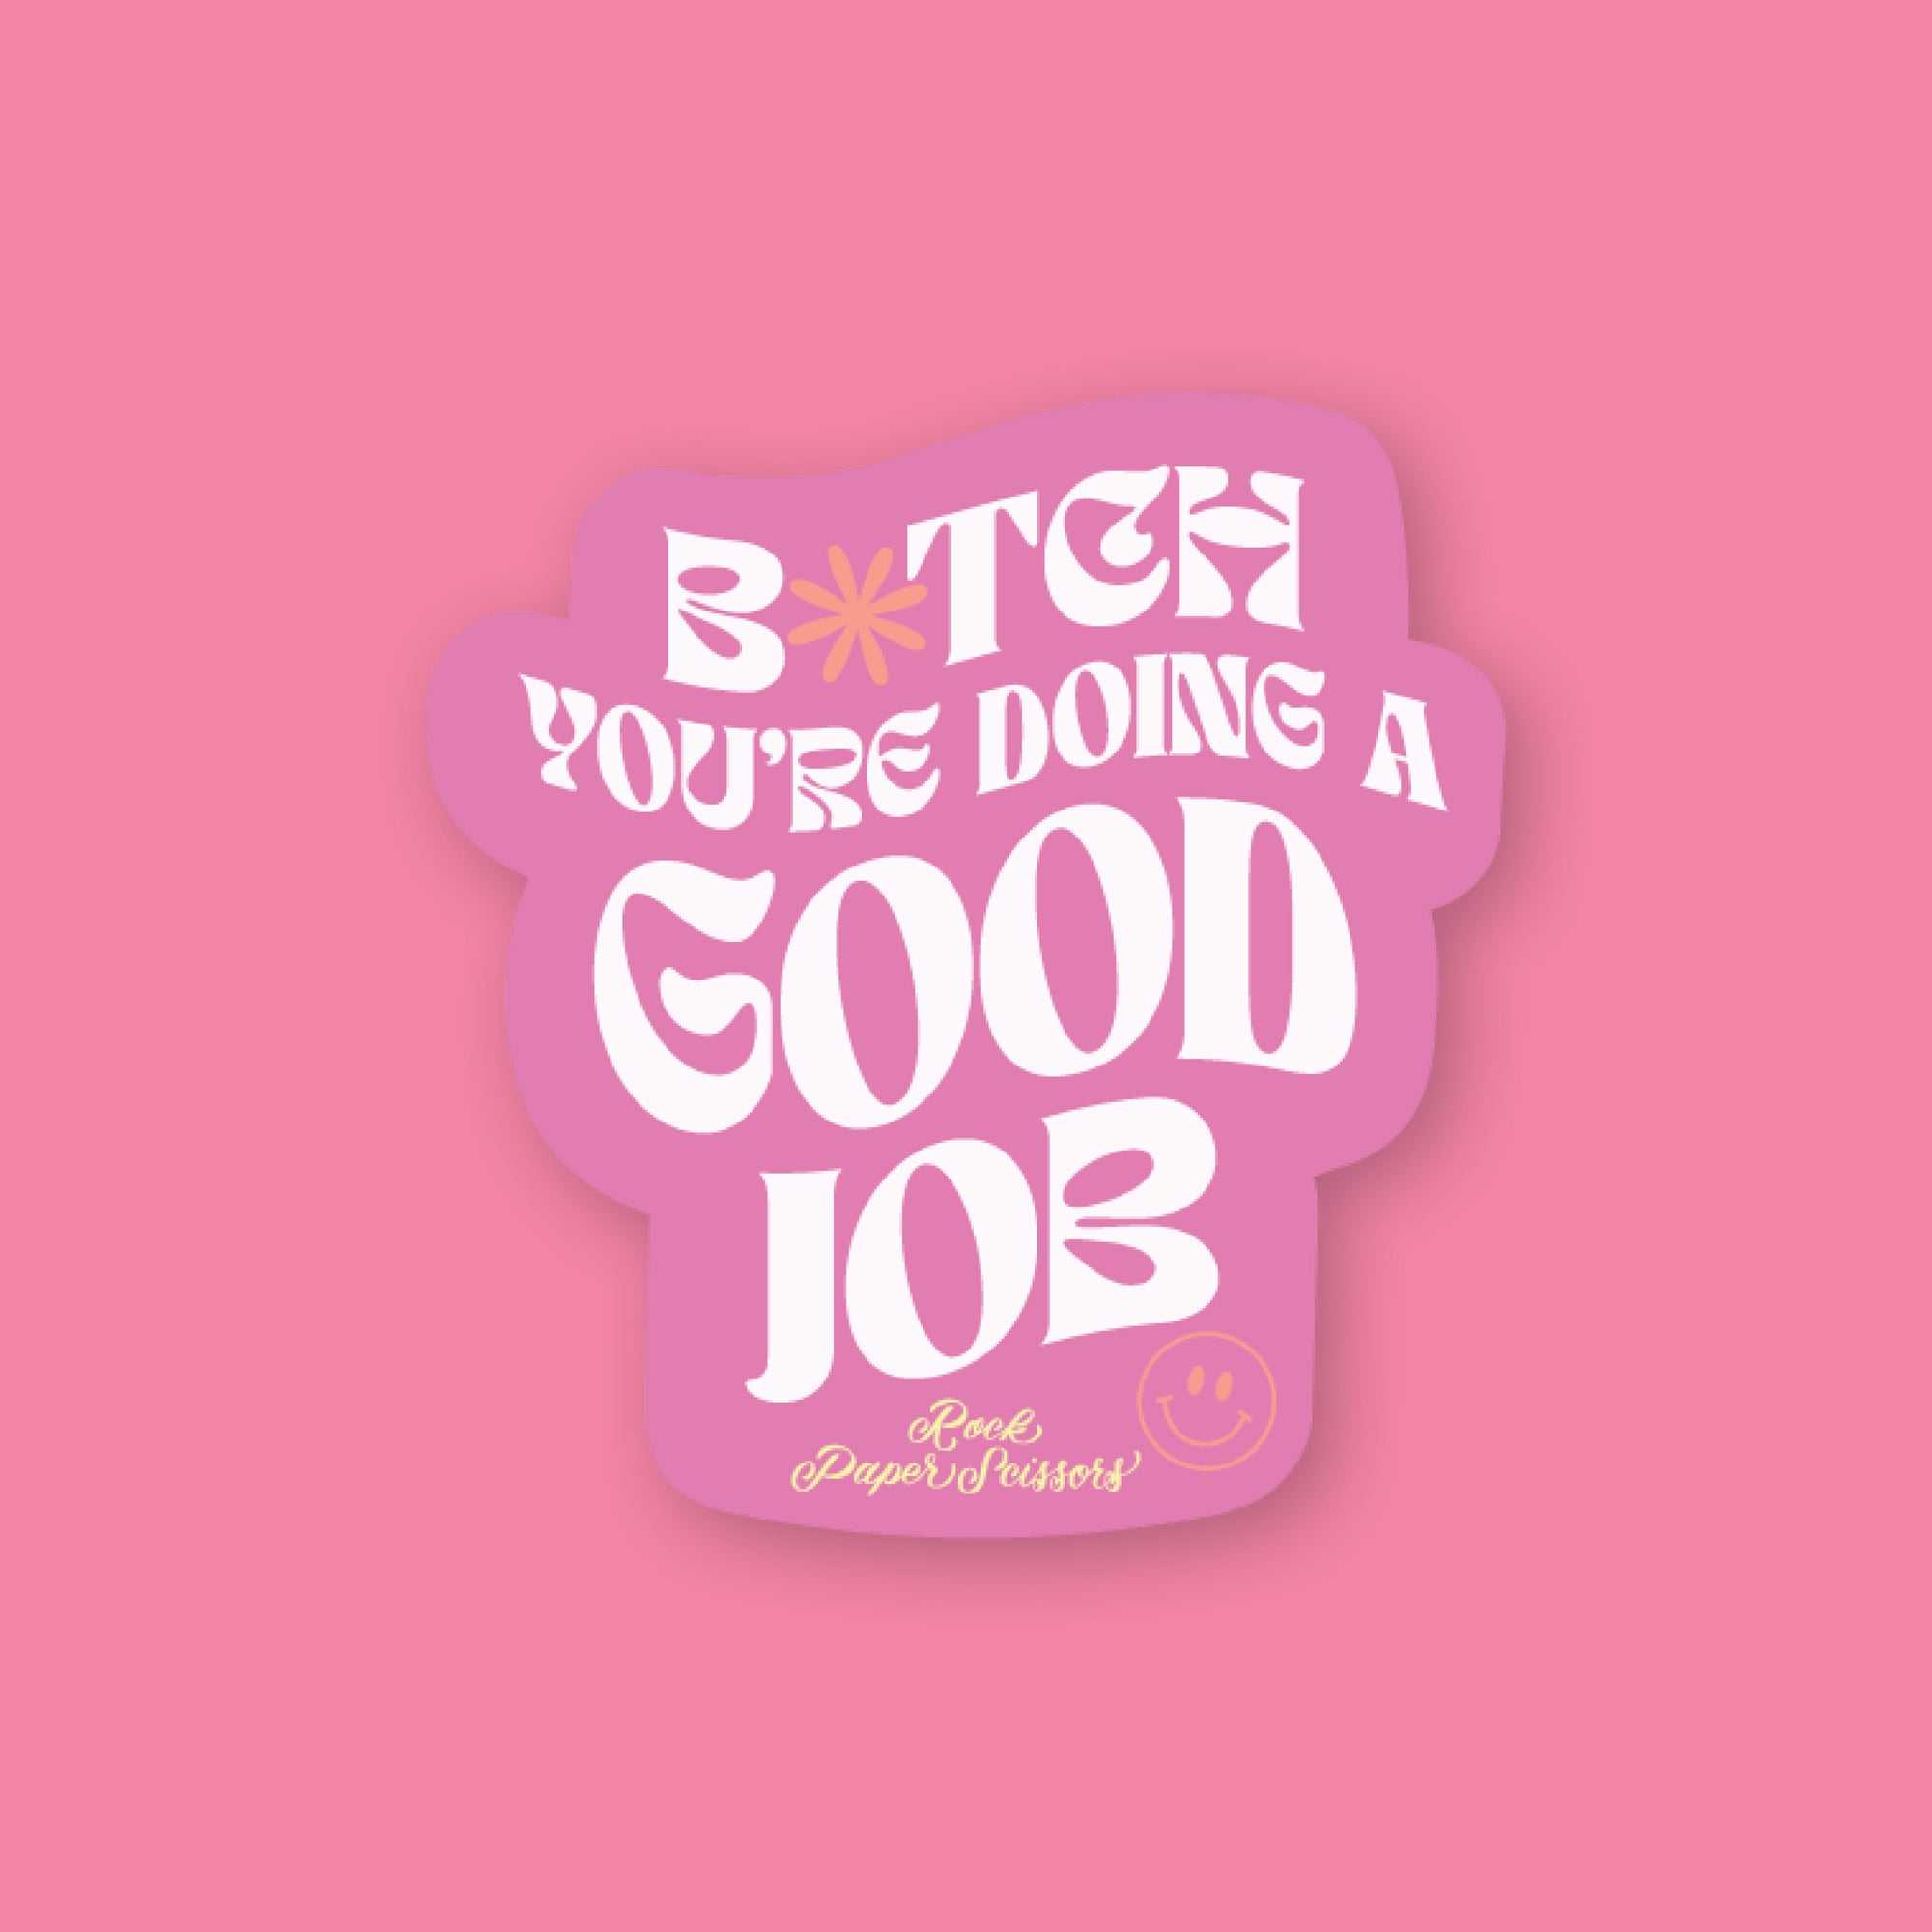 On a bubblegum pink background sits an RPS Exclusive purple sticker that says "B*tch You're Doing A Good Job" in a white, groovy font with "Rock Paper Scissors" handwritten below it in yellow with a smiley face. 